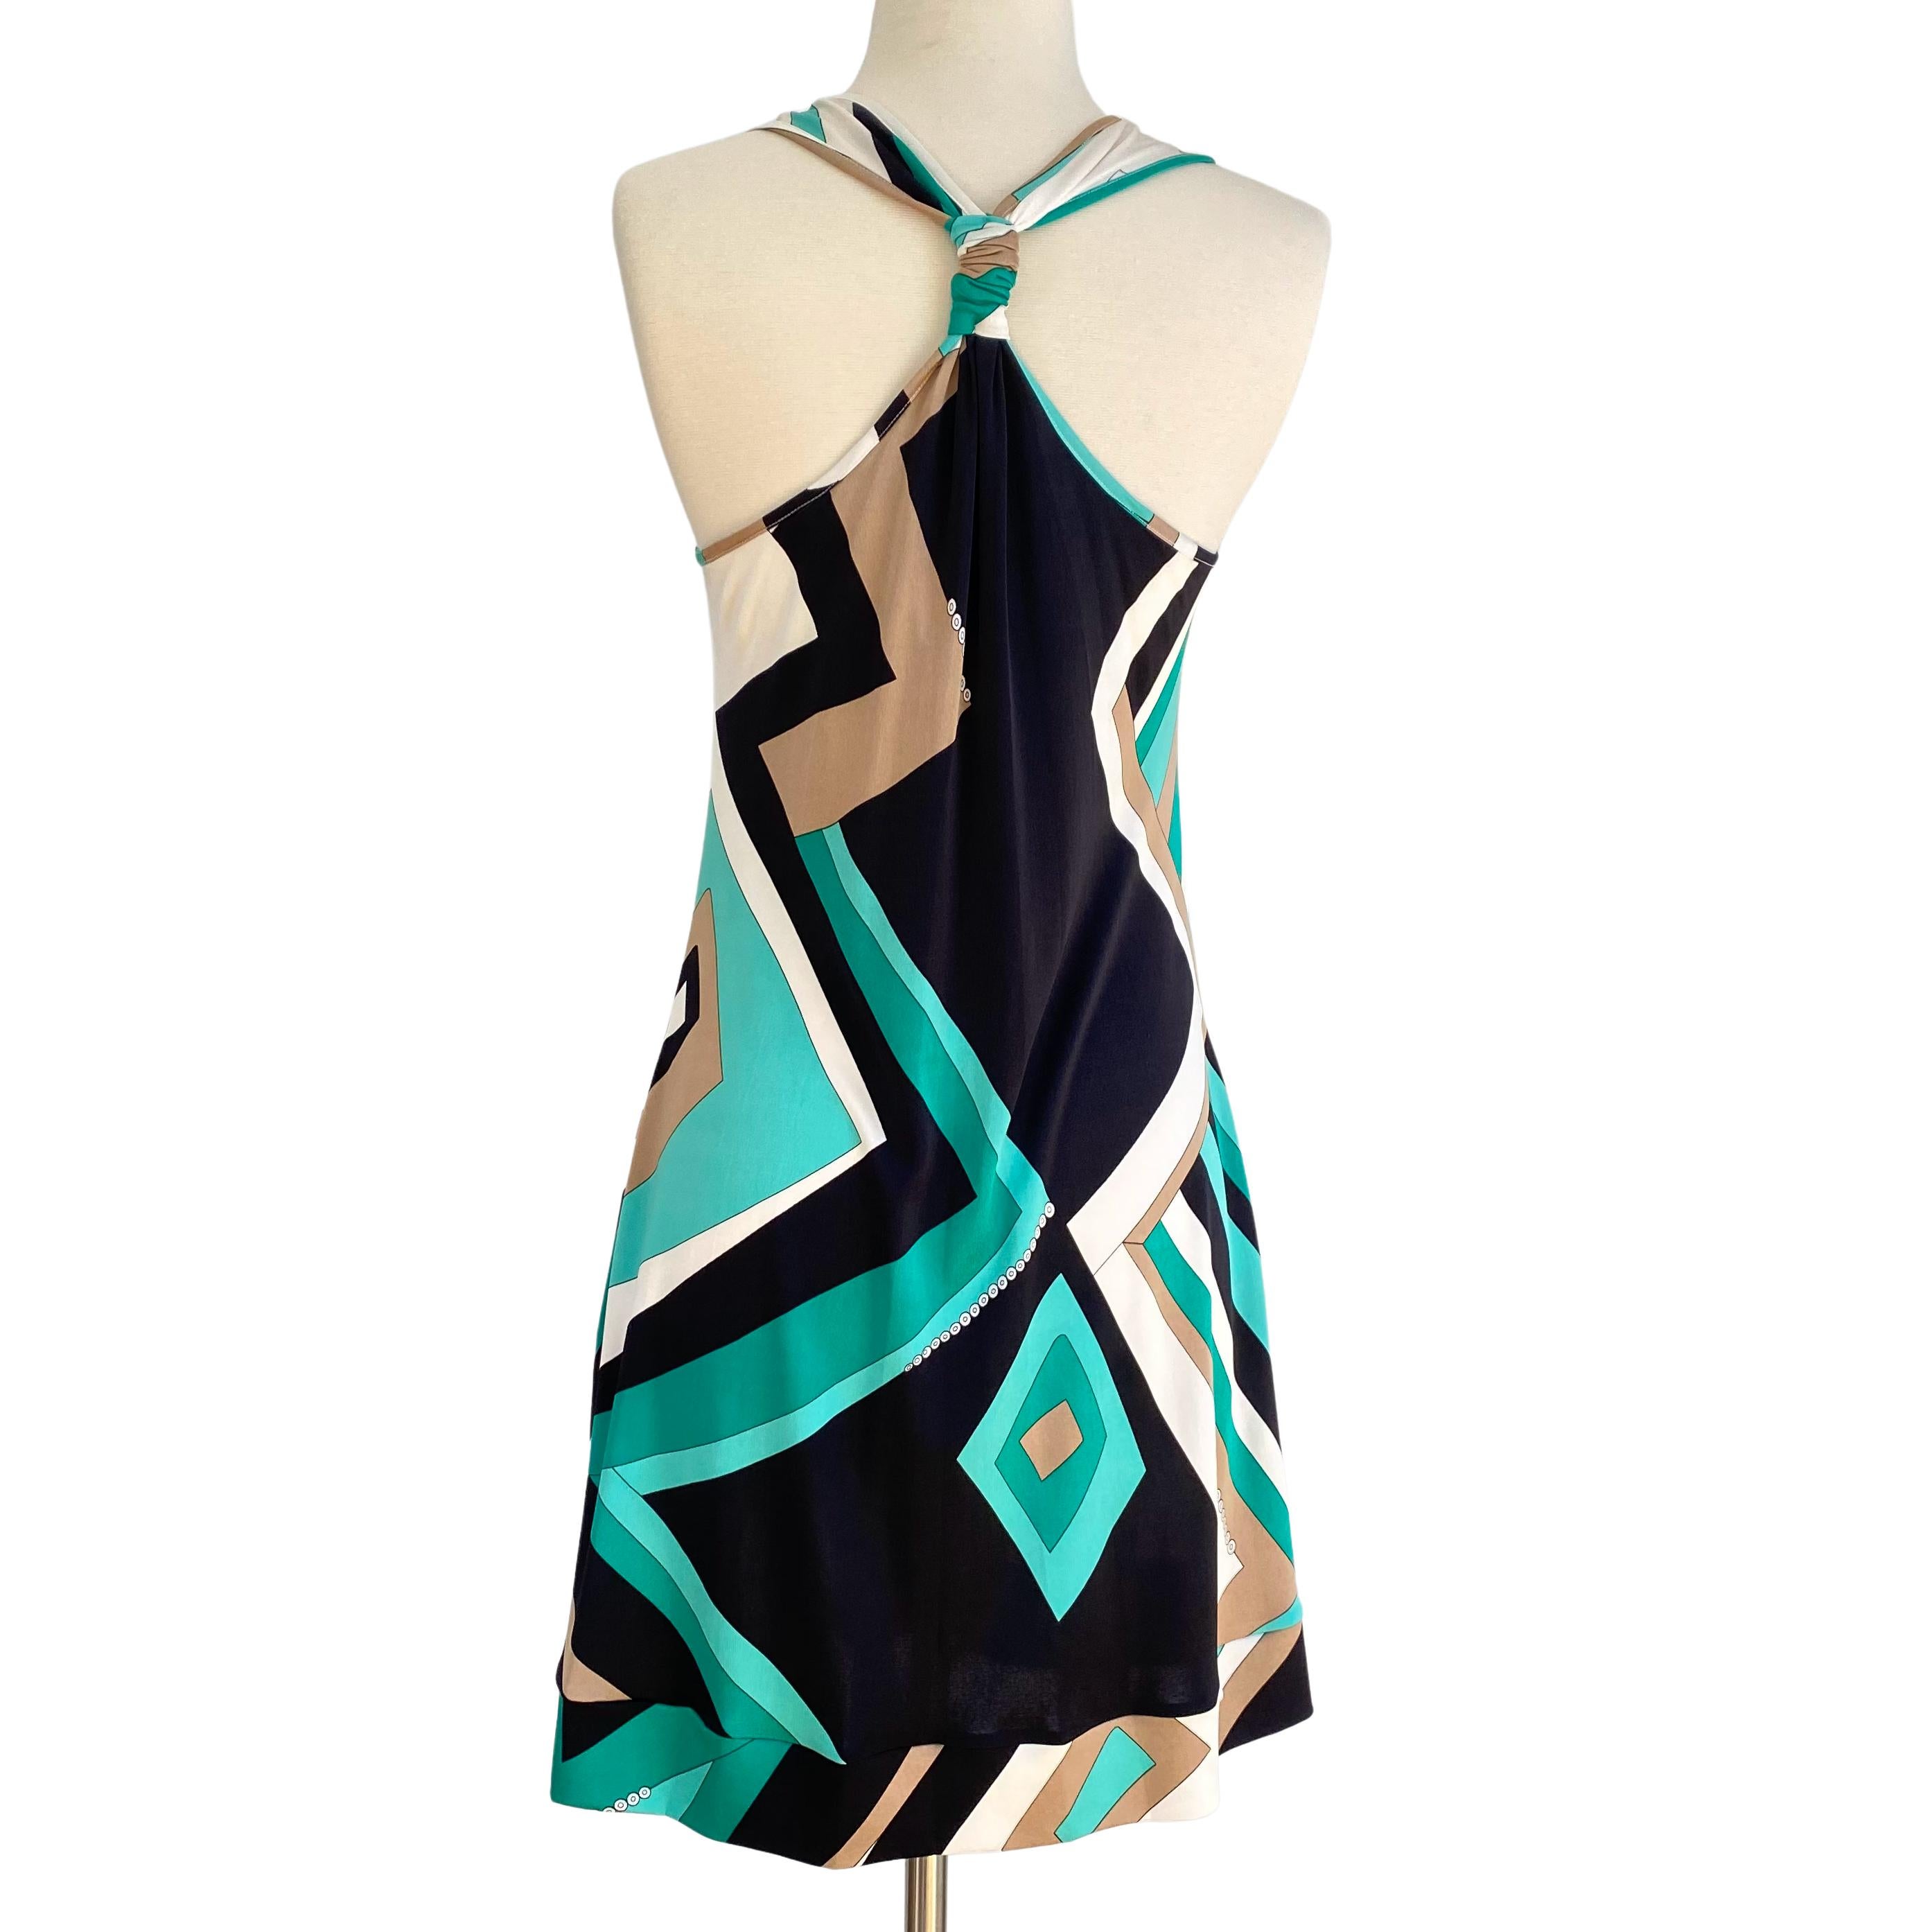 Pockets!! Cool comfy aqua sand color silk jersey mini halter dress with pockets.
Relaxed fit.
Shirred front to enhance bust area. 
Lots of volume with every movement.
Approximately 34